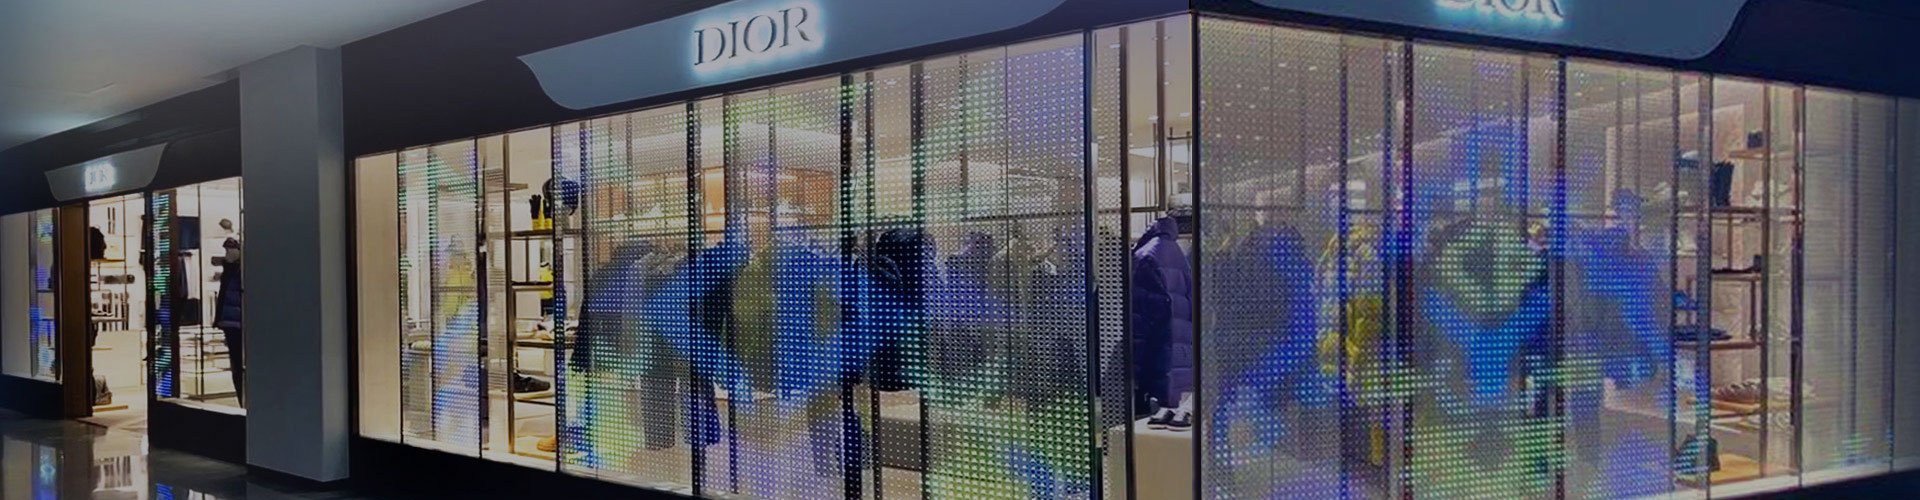 Dior store LED transparent screen display effect